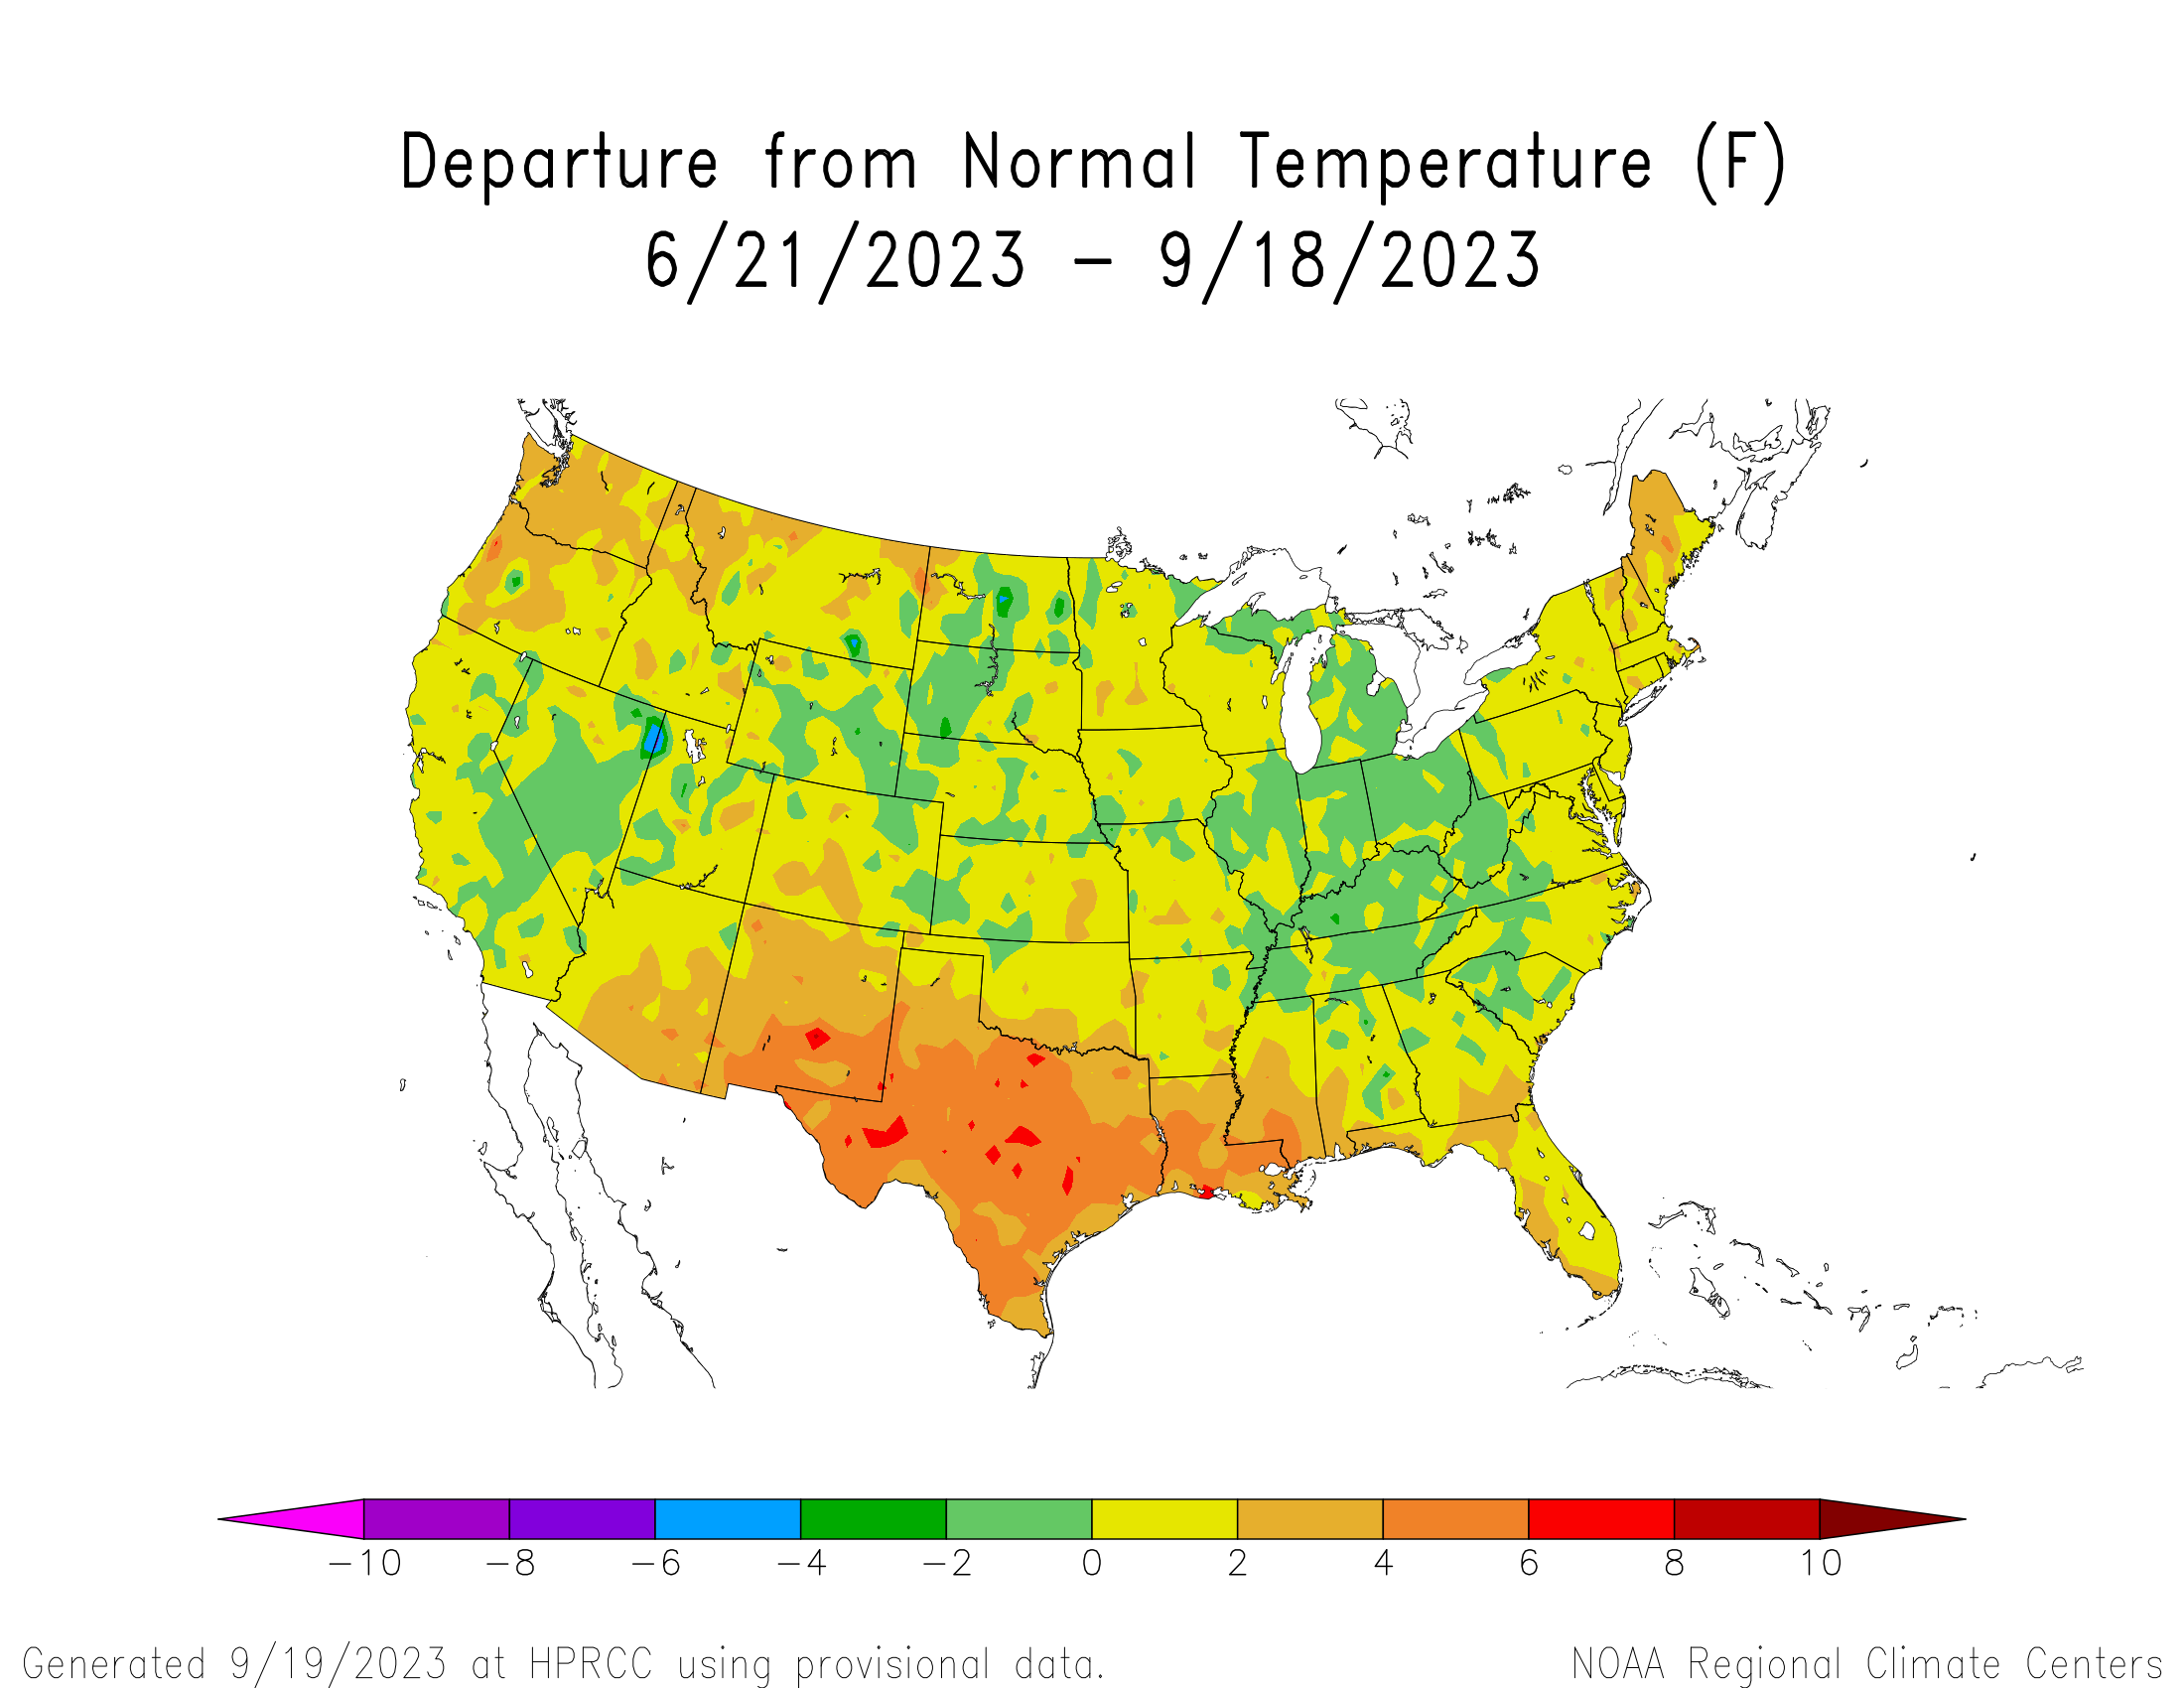 Departure from normal precipitation for the contiguous United States for June 21, 2023 to September 18, 2023.